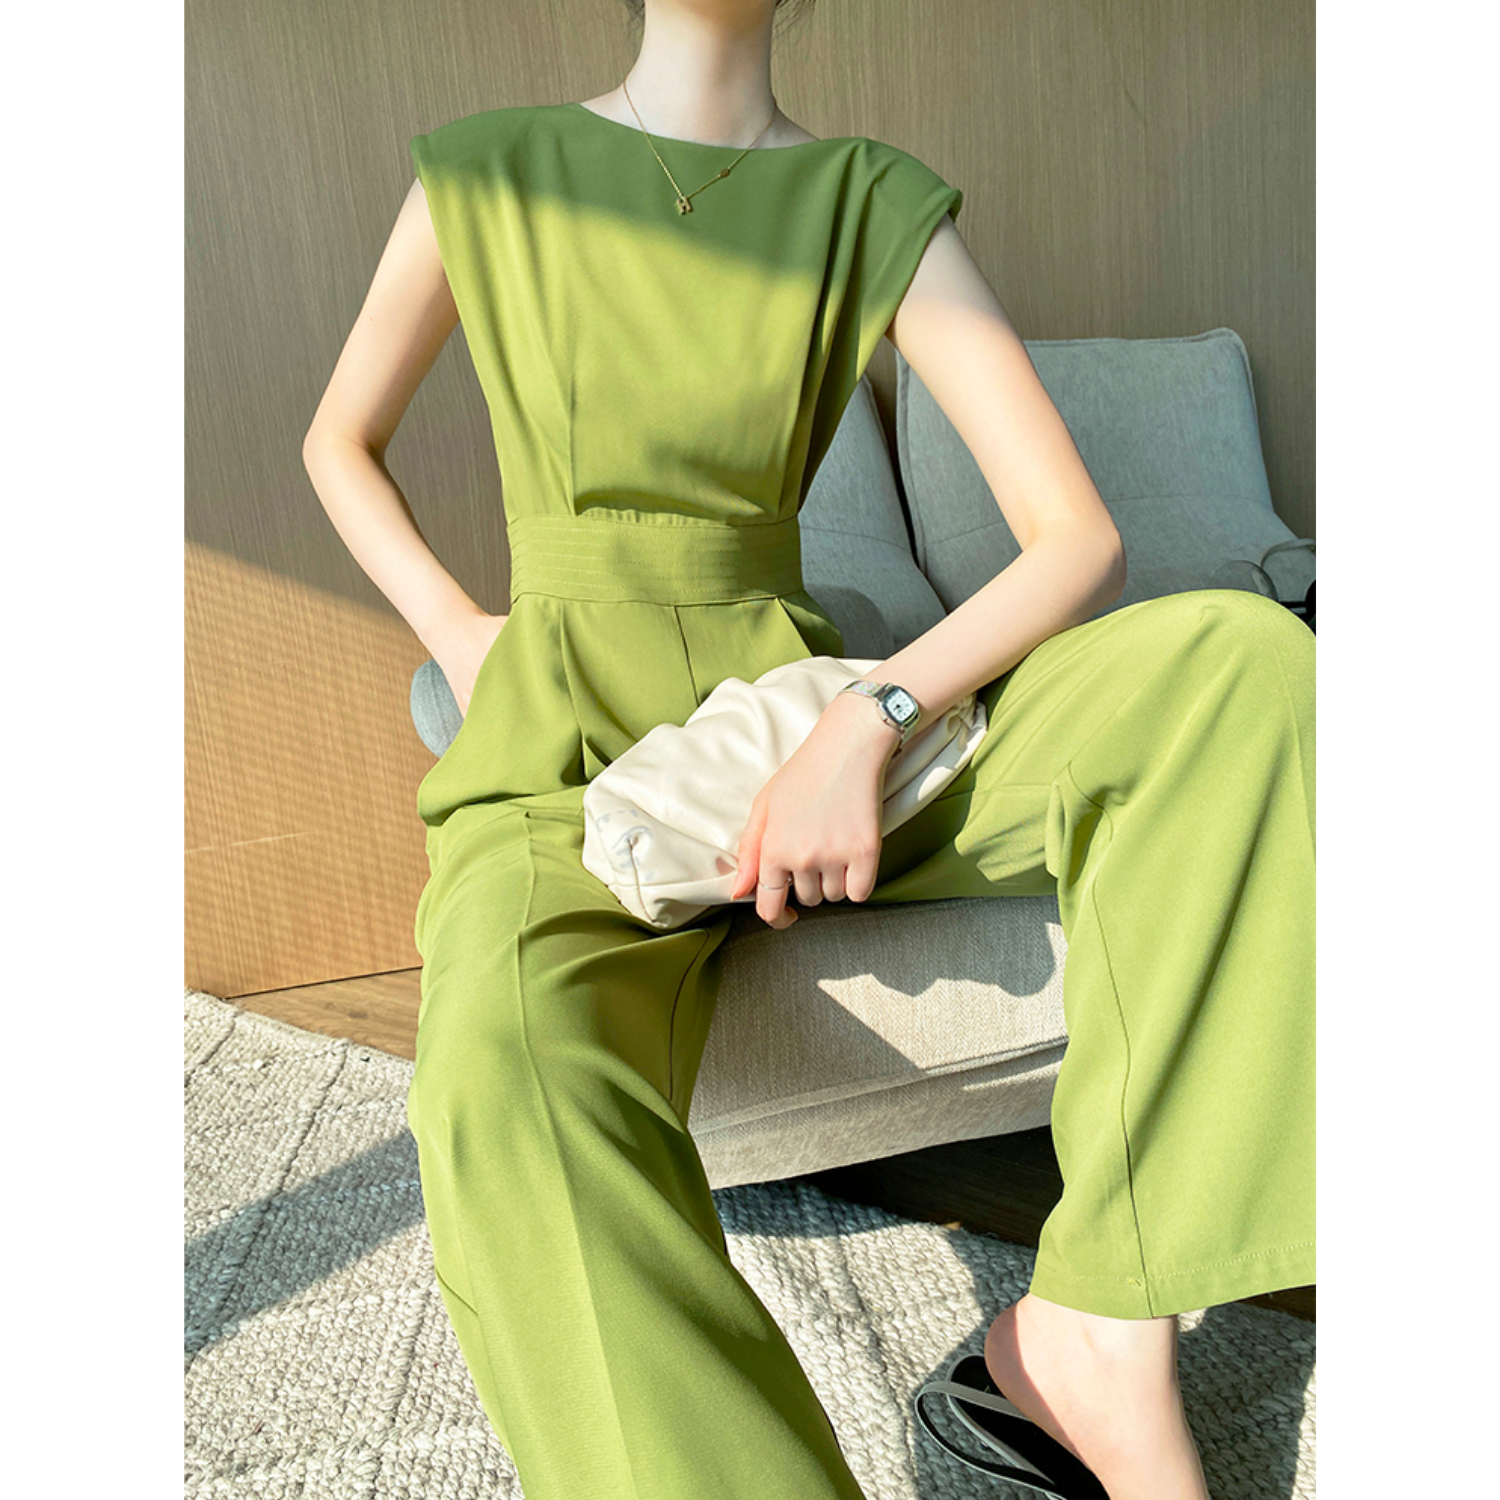 Crew Neck Sleeveless Jumpsuit With Padded Shoulders - Olive Green